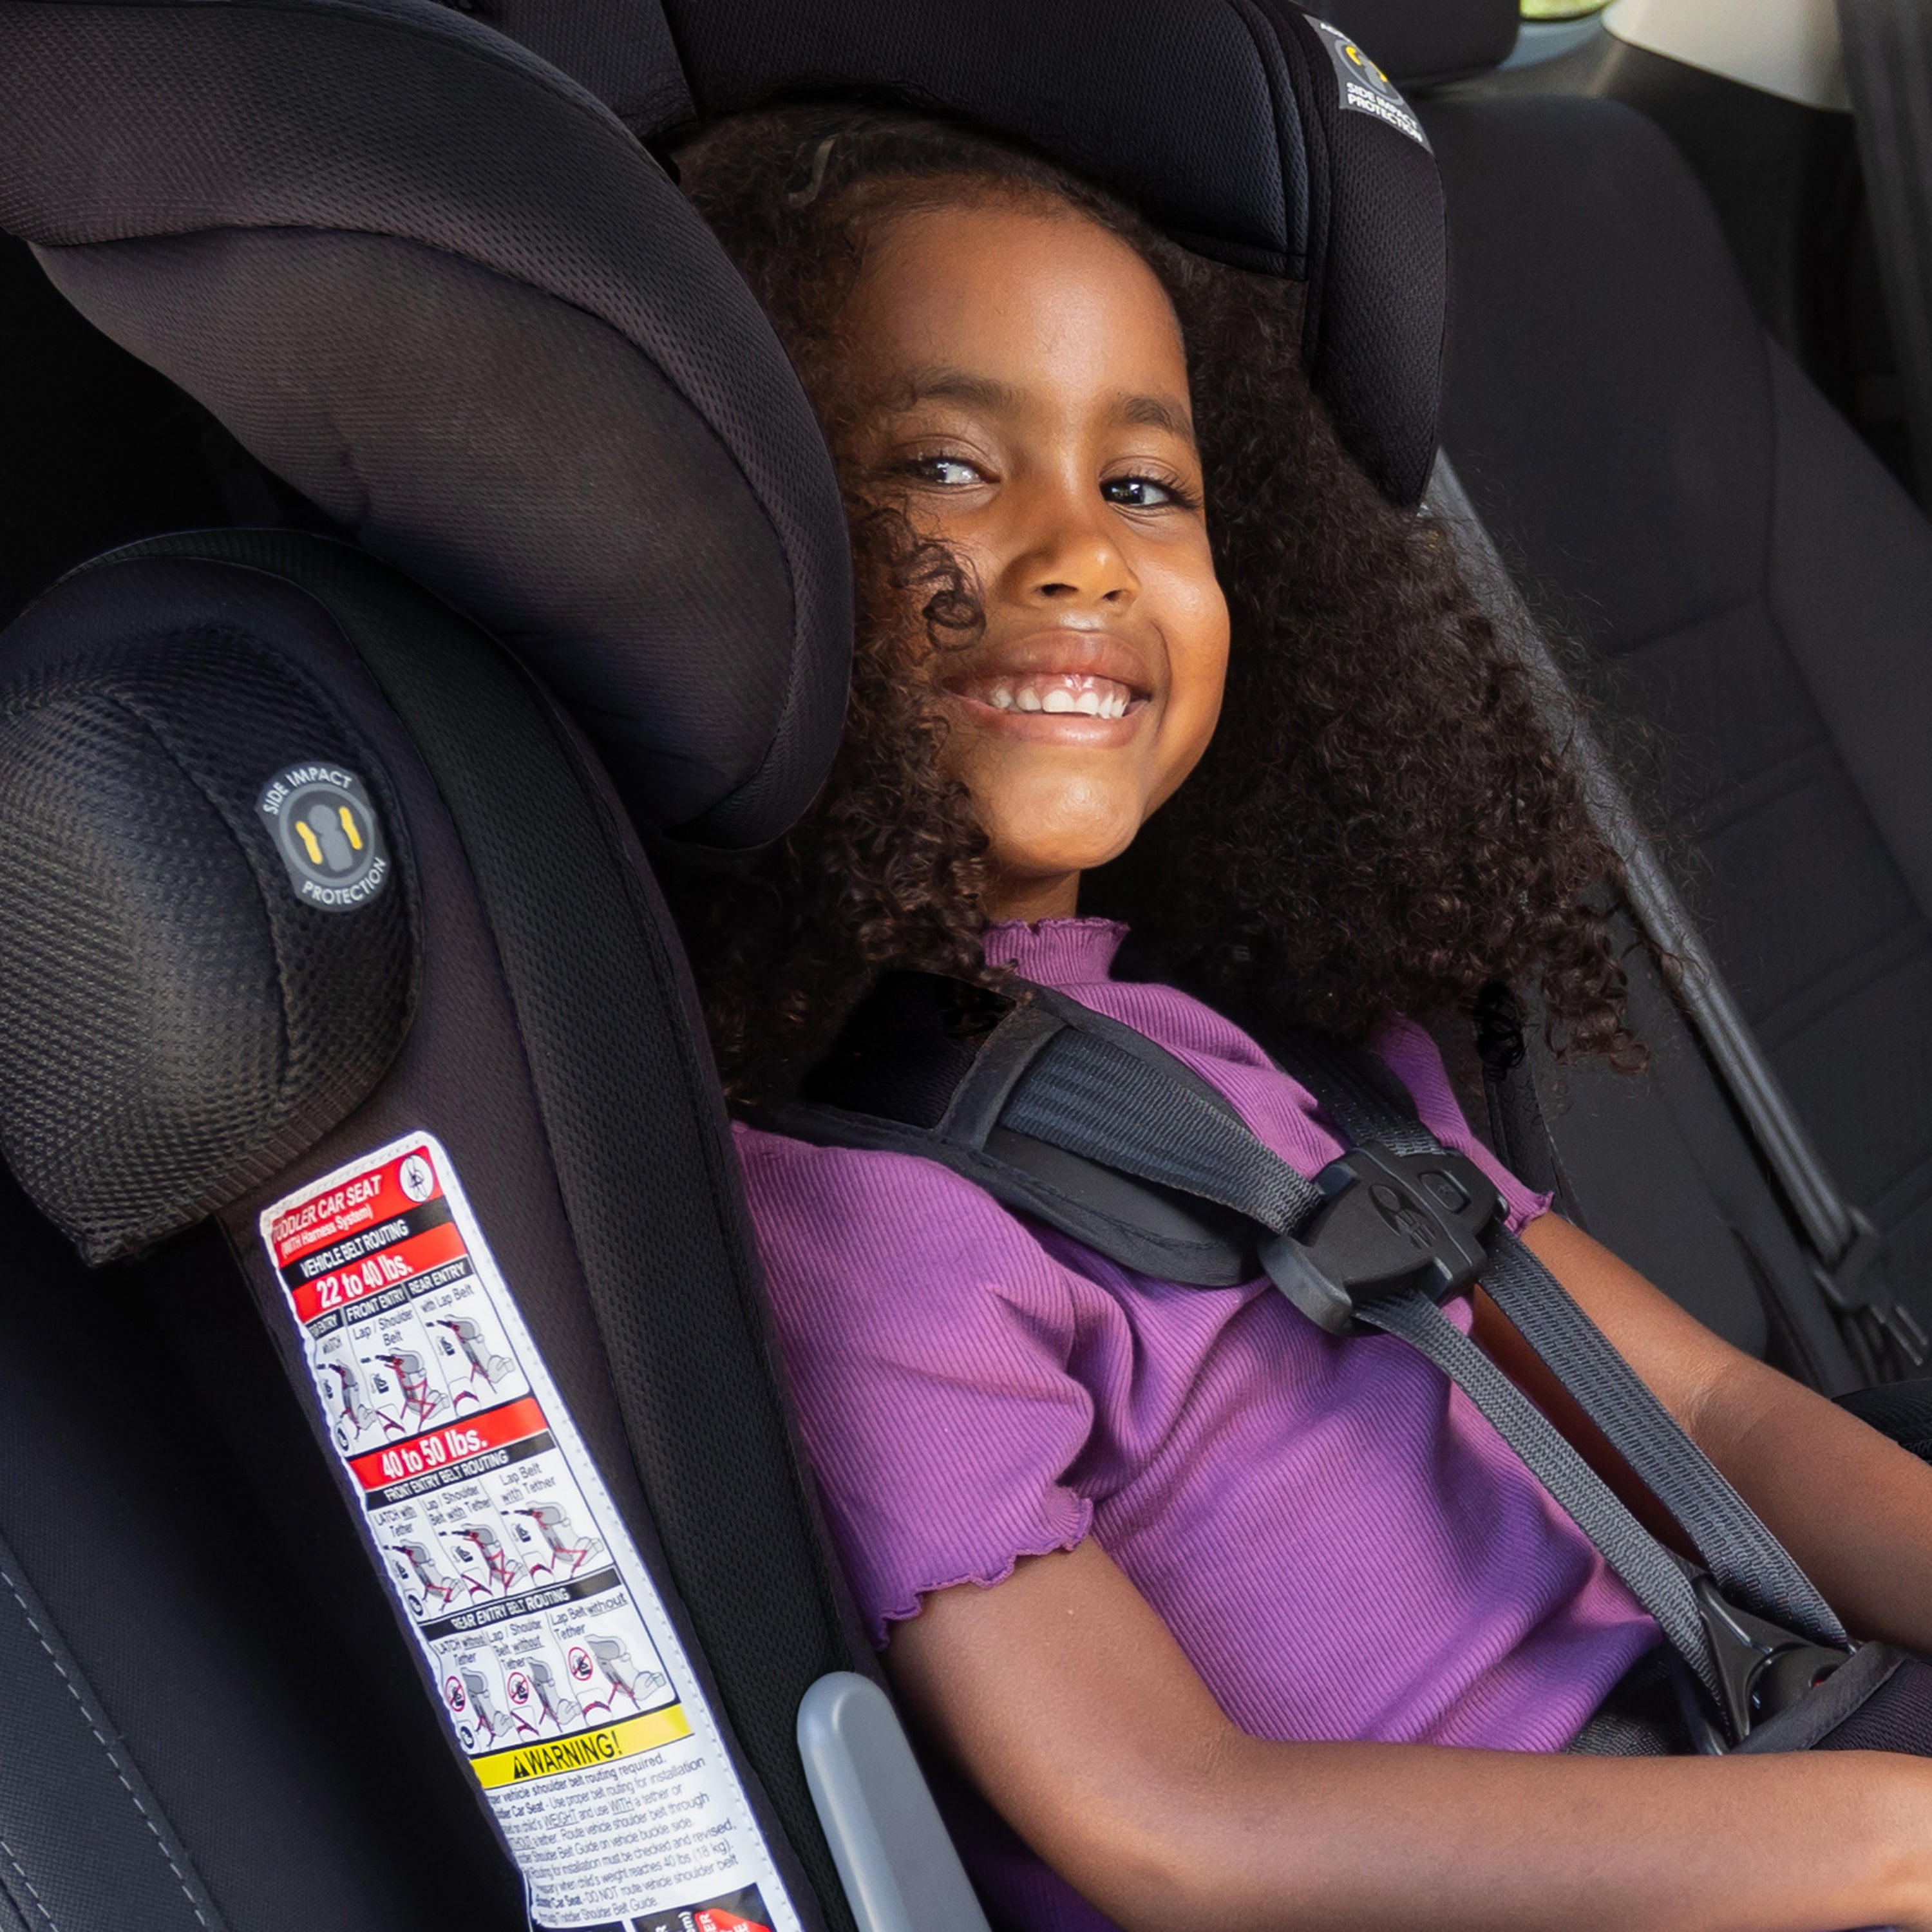 Baby Products Online - Safety belt adjustment for a car seat for